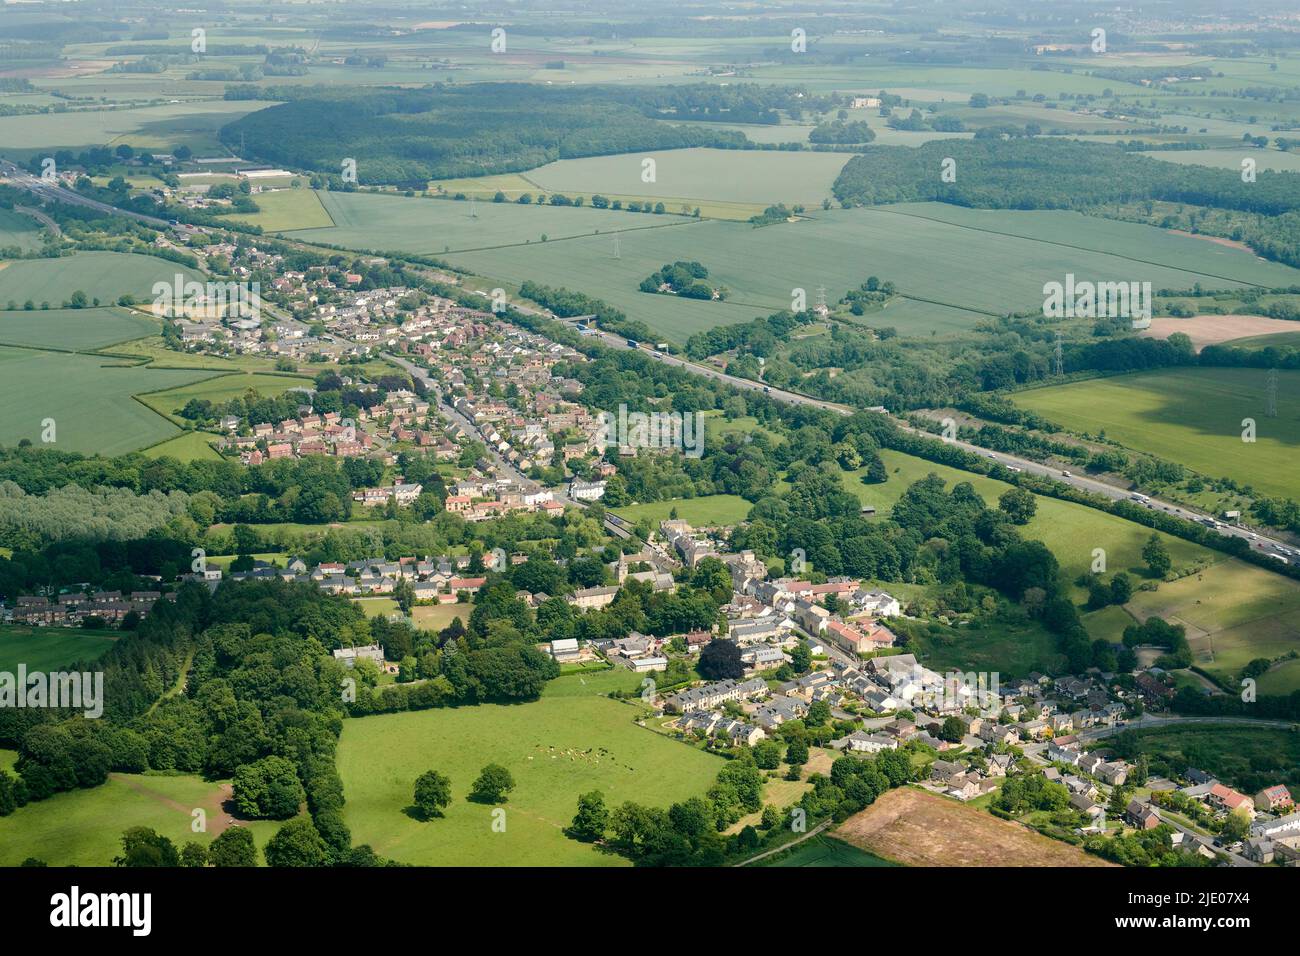 The village of Aberford, West Yorkshire, northern England, route of the old A1, adjacent to the new A1 Motorway, shot from the air Stock Photo